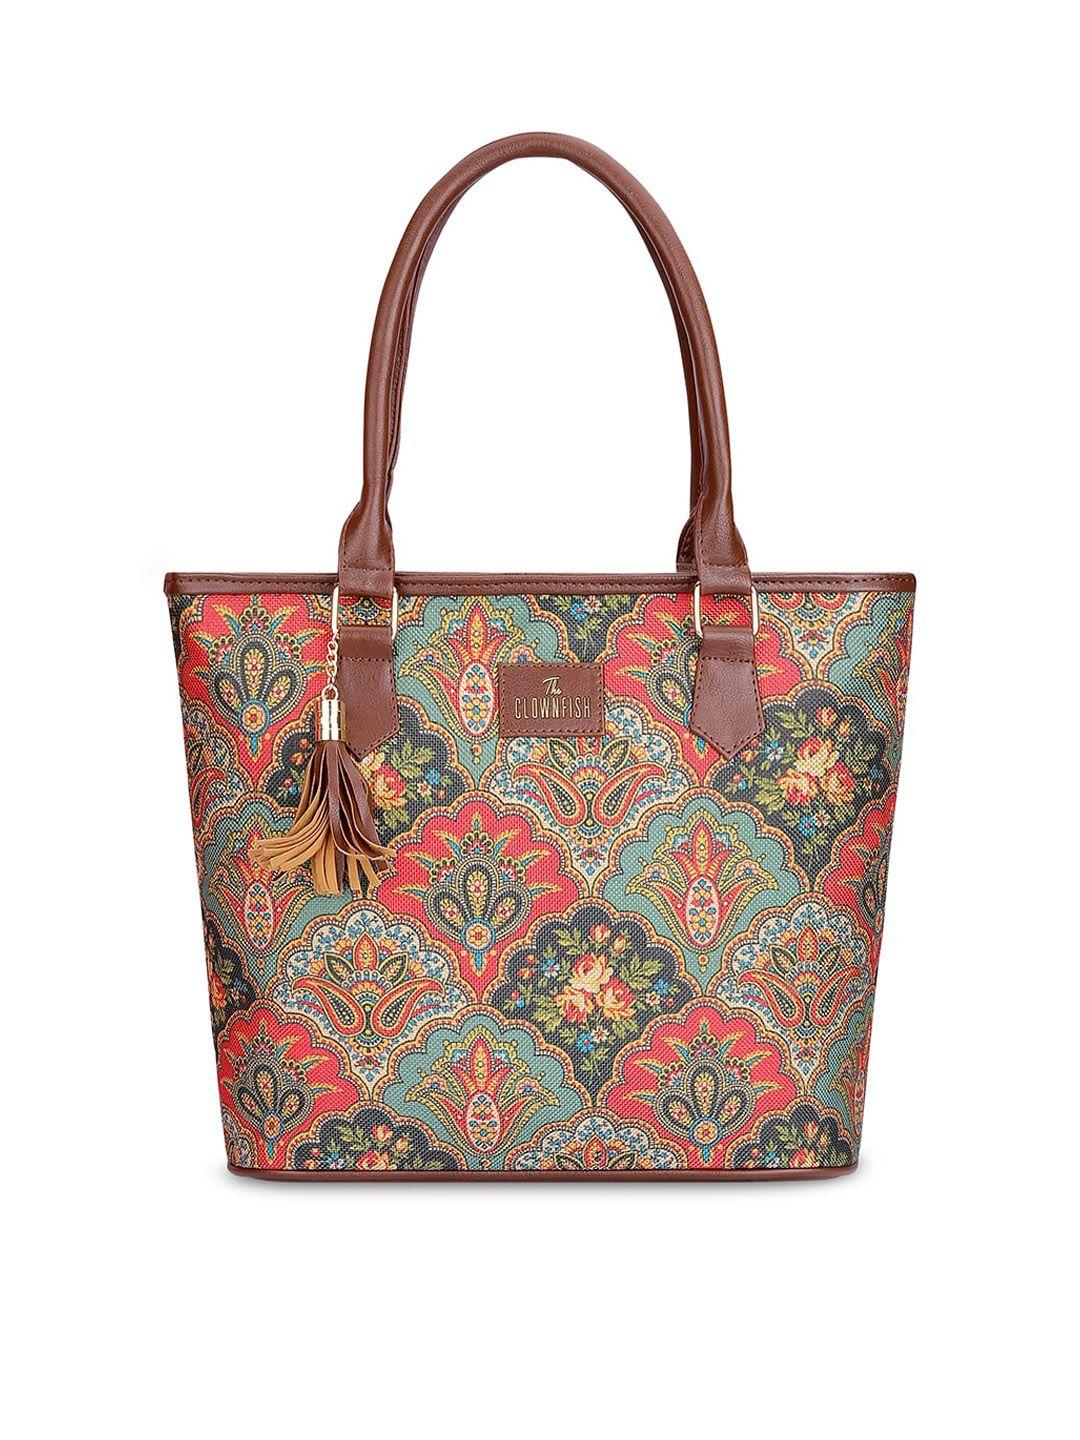 the-clownfish-floral-printed-structured-shoulder-bag-with-tasselled